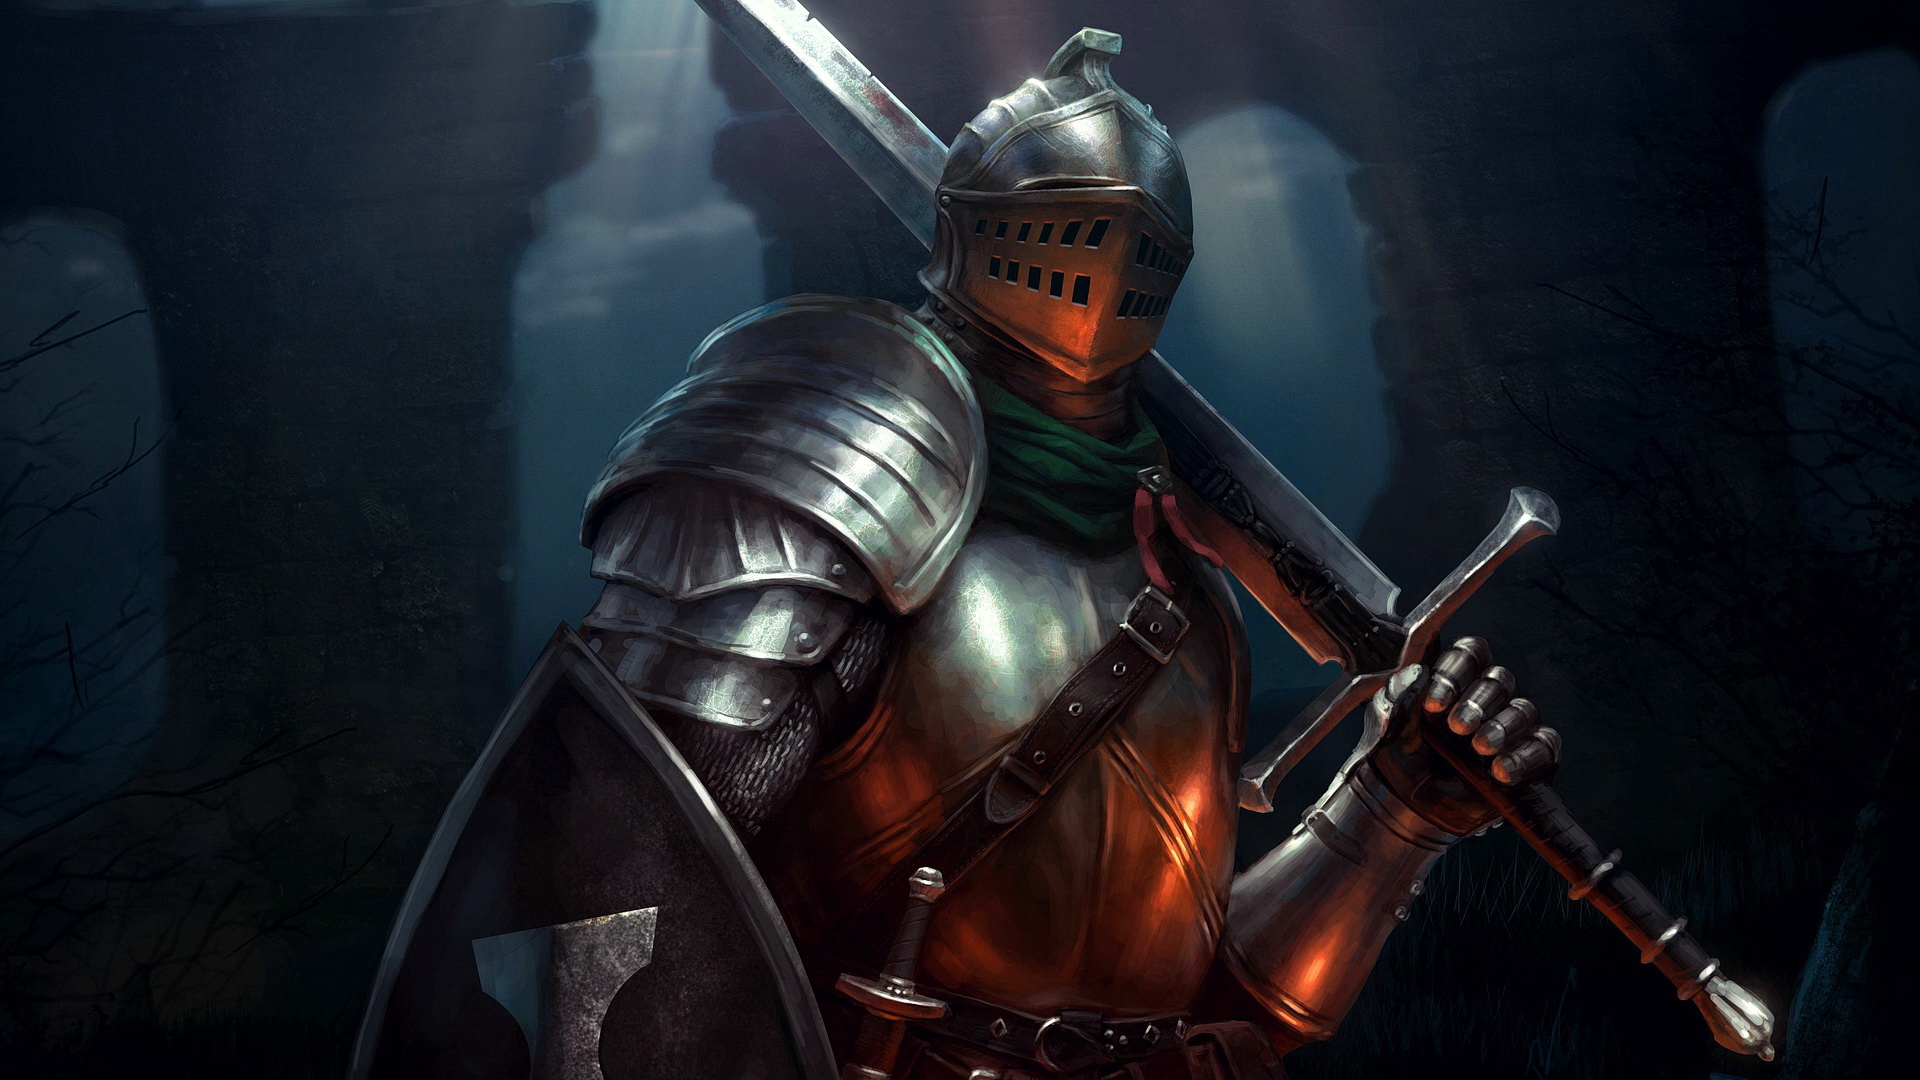 Knight with sword and shield